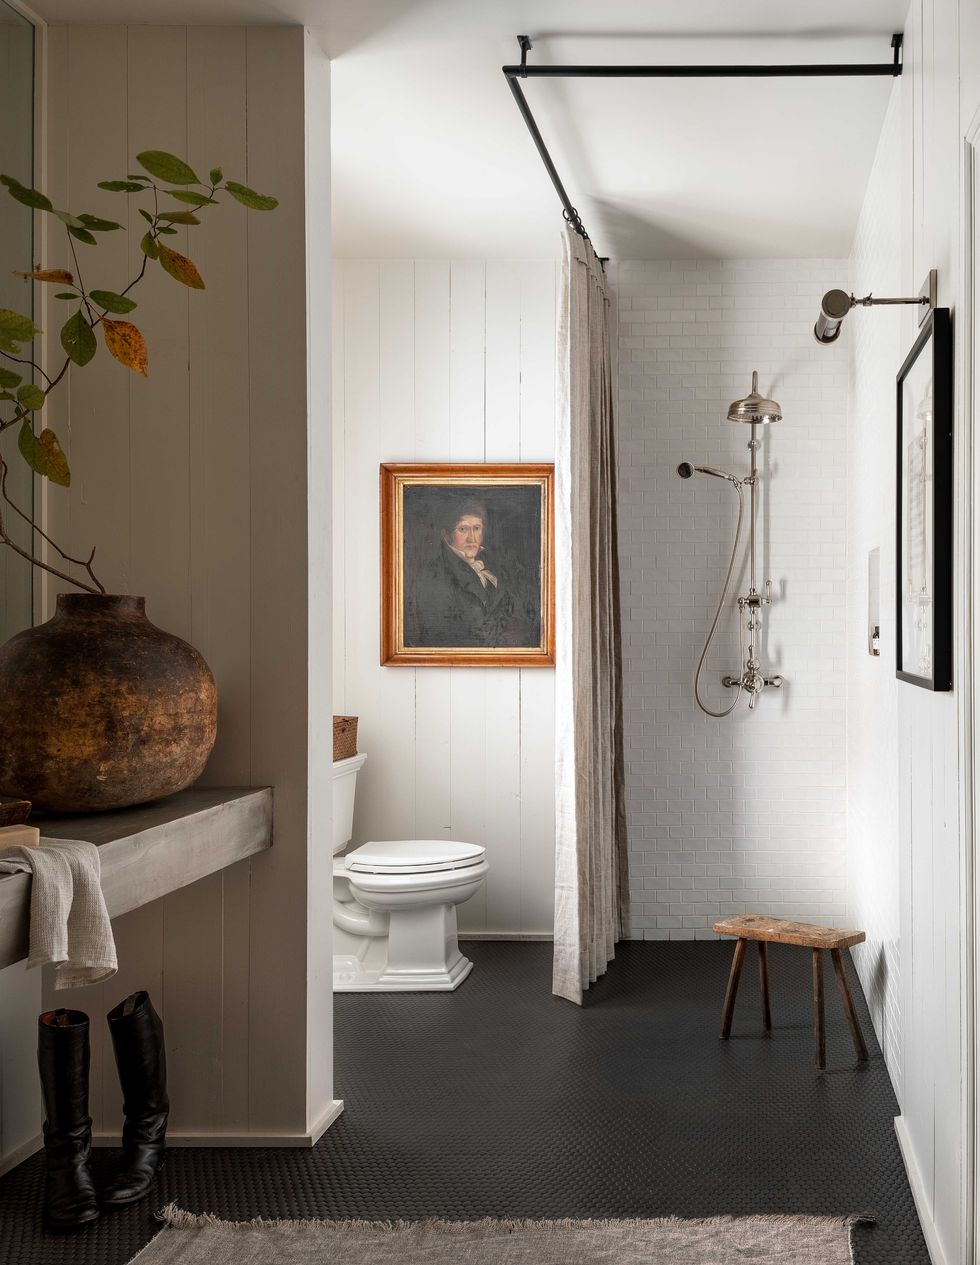 black tiles, white painted bathroom, brick and wood panelling